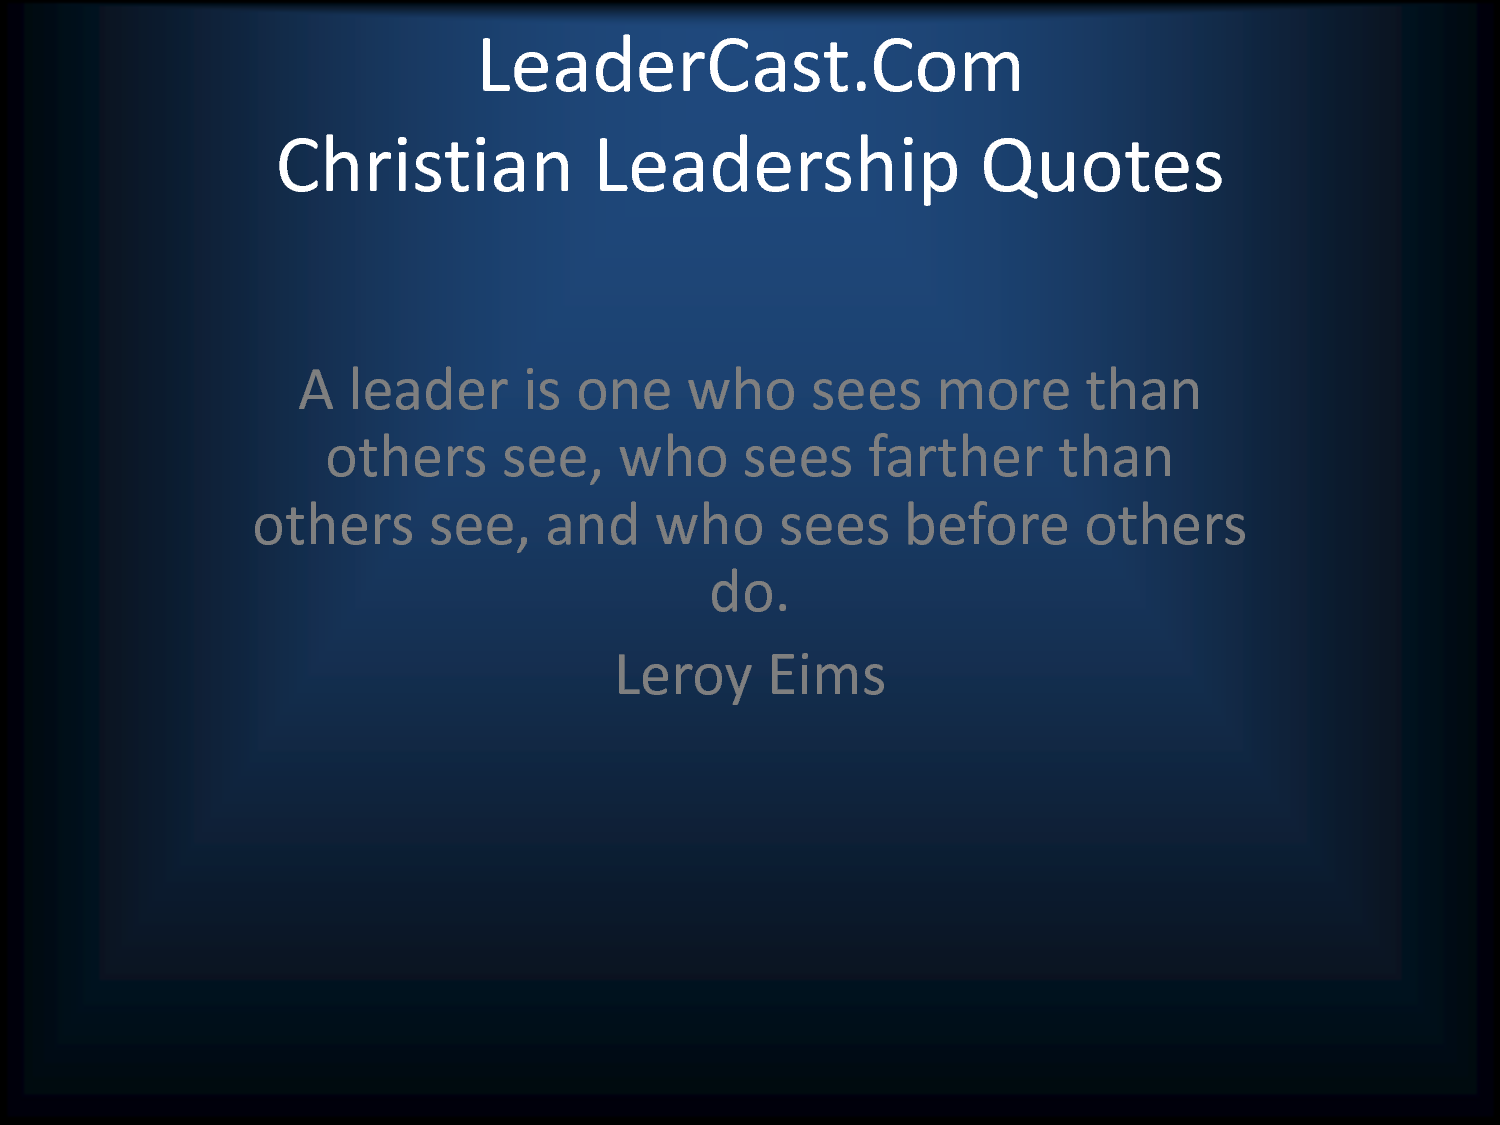 A leader is one who sees more than others see, who sees farther than others see, and who sees before others do. Leroy Eims